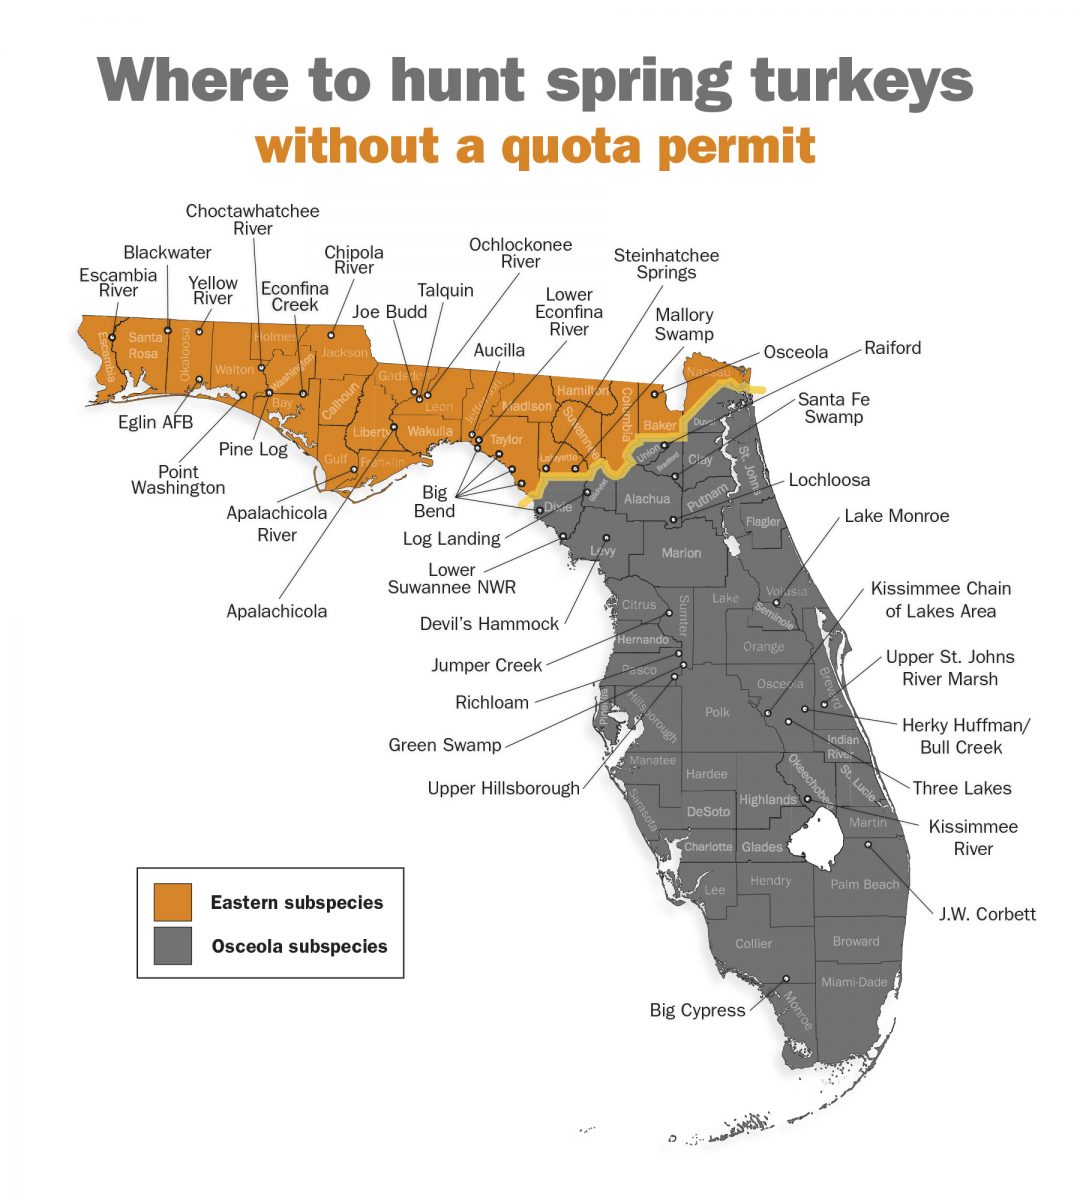 Hunting Spring Turkeys Without a Quota Permit Great Days Outdoors